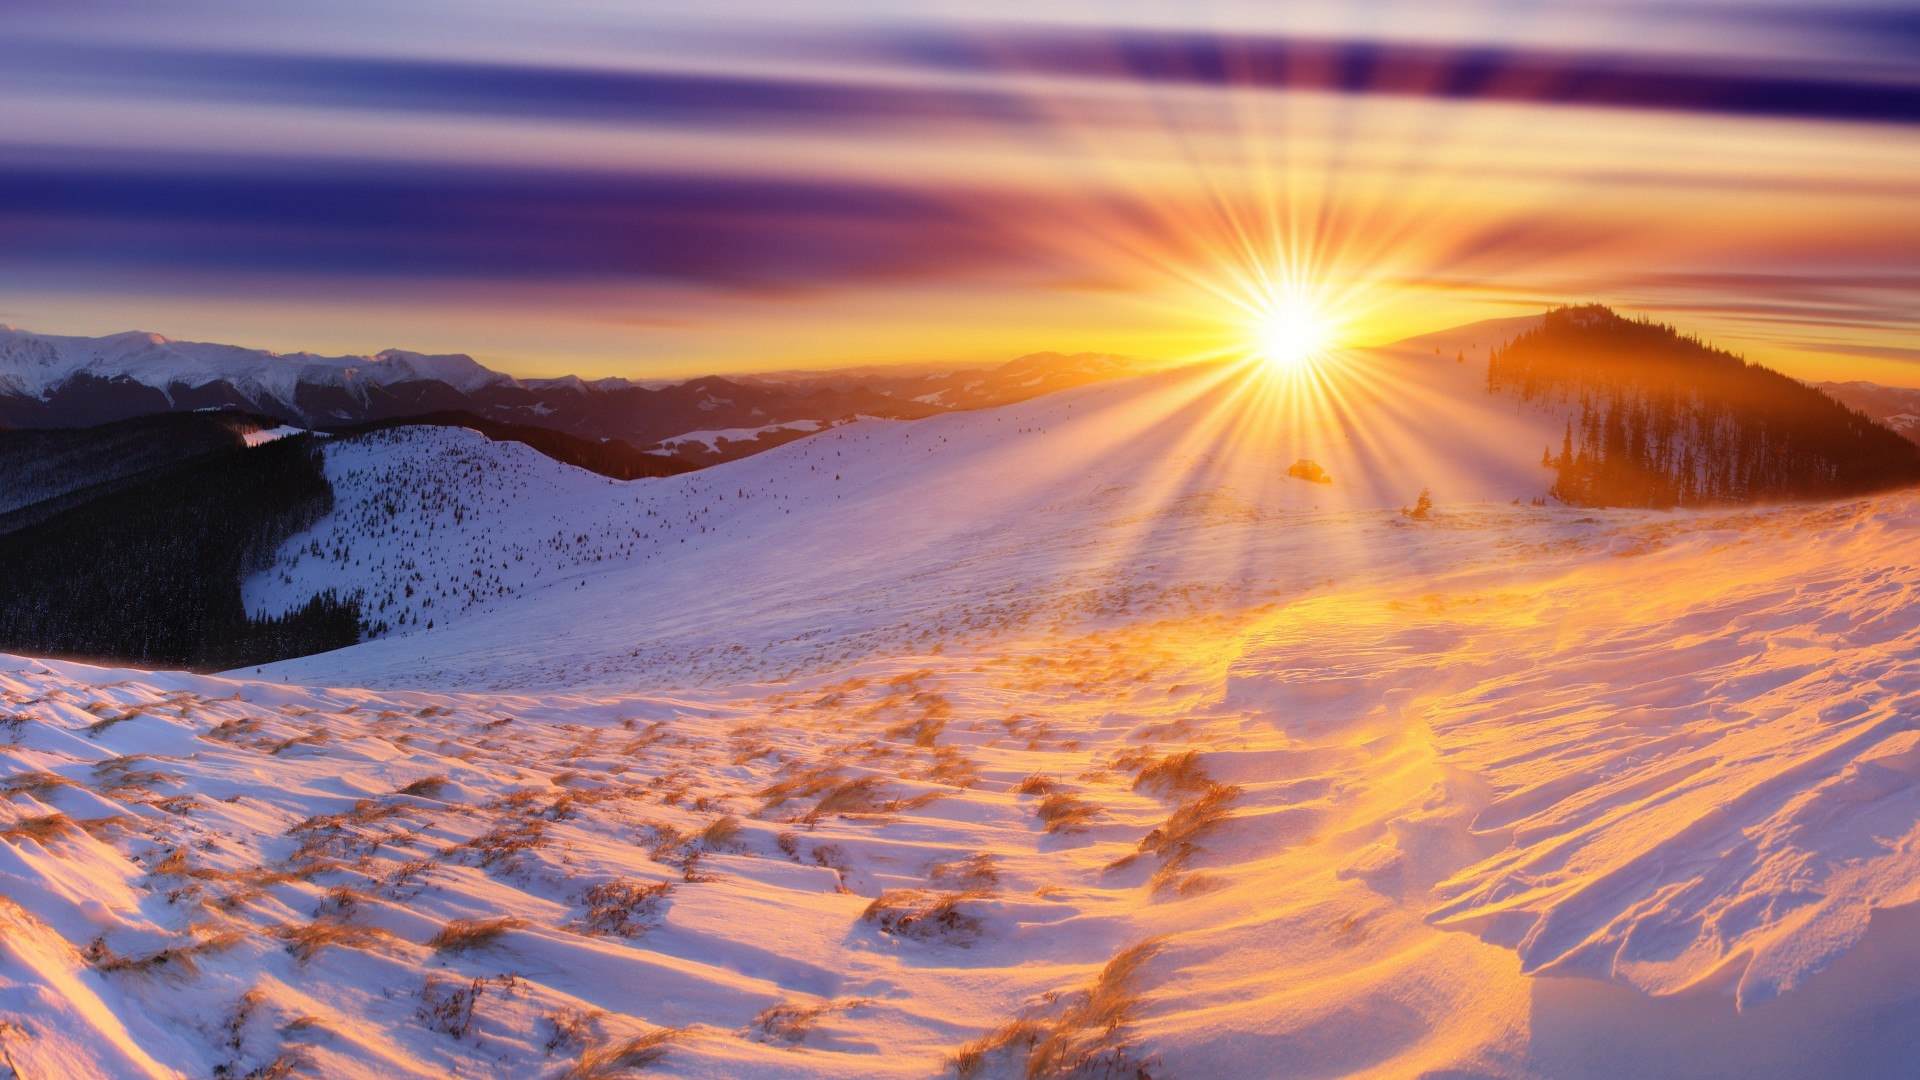 nature, Landscapes, Mountains, Snow, Winter, Sky, Clouds, Hdr, Sunset, Sunrise Wallpaper